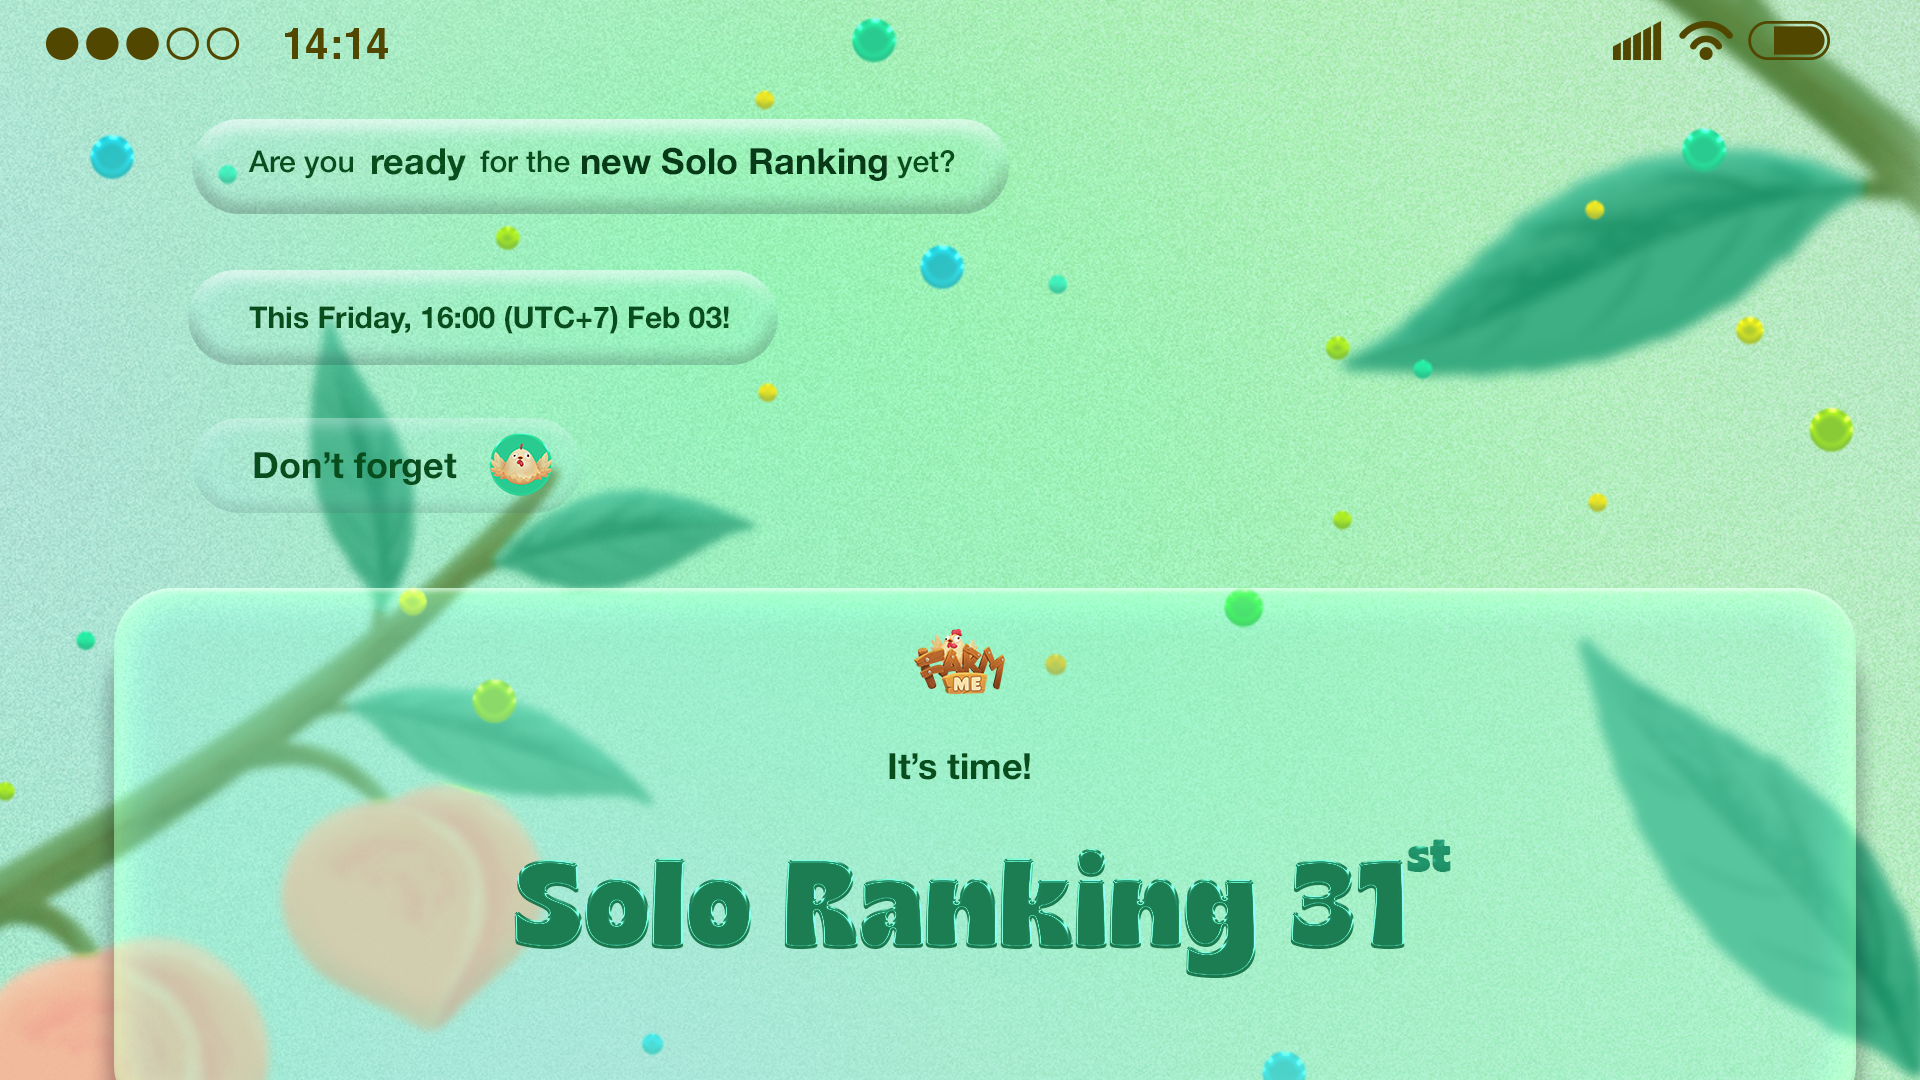 SOLO RANKING - Detailed information of 31th Solo Ranking